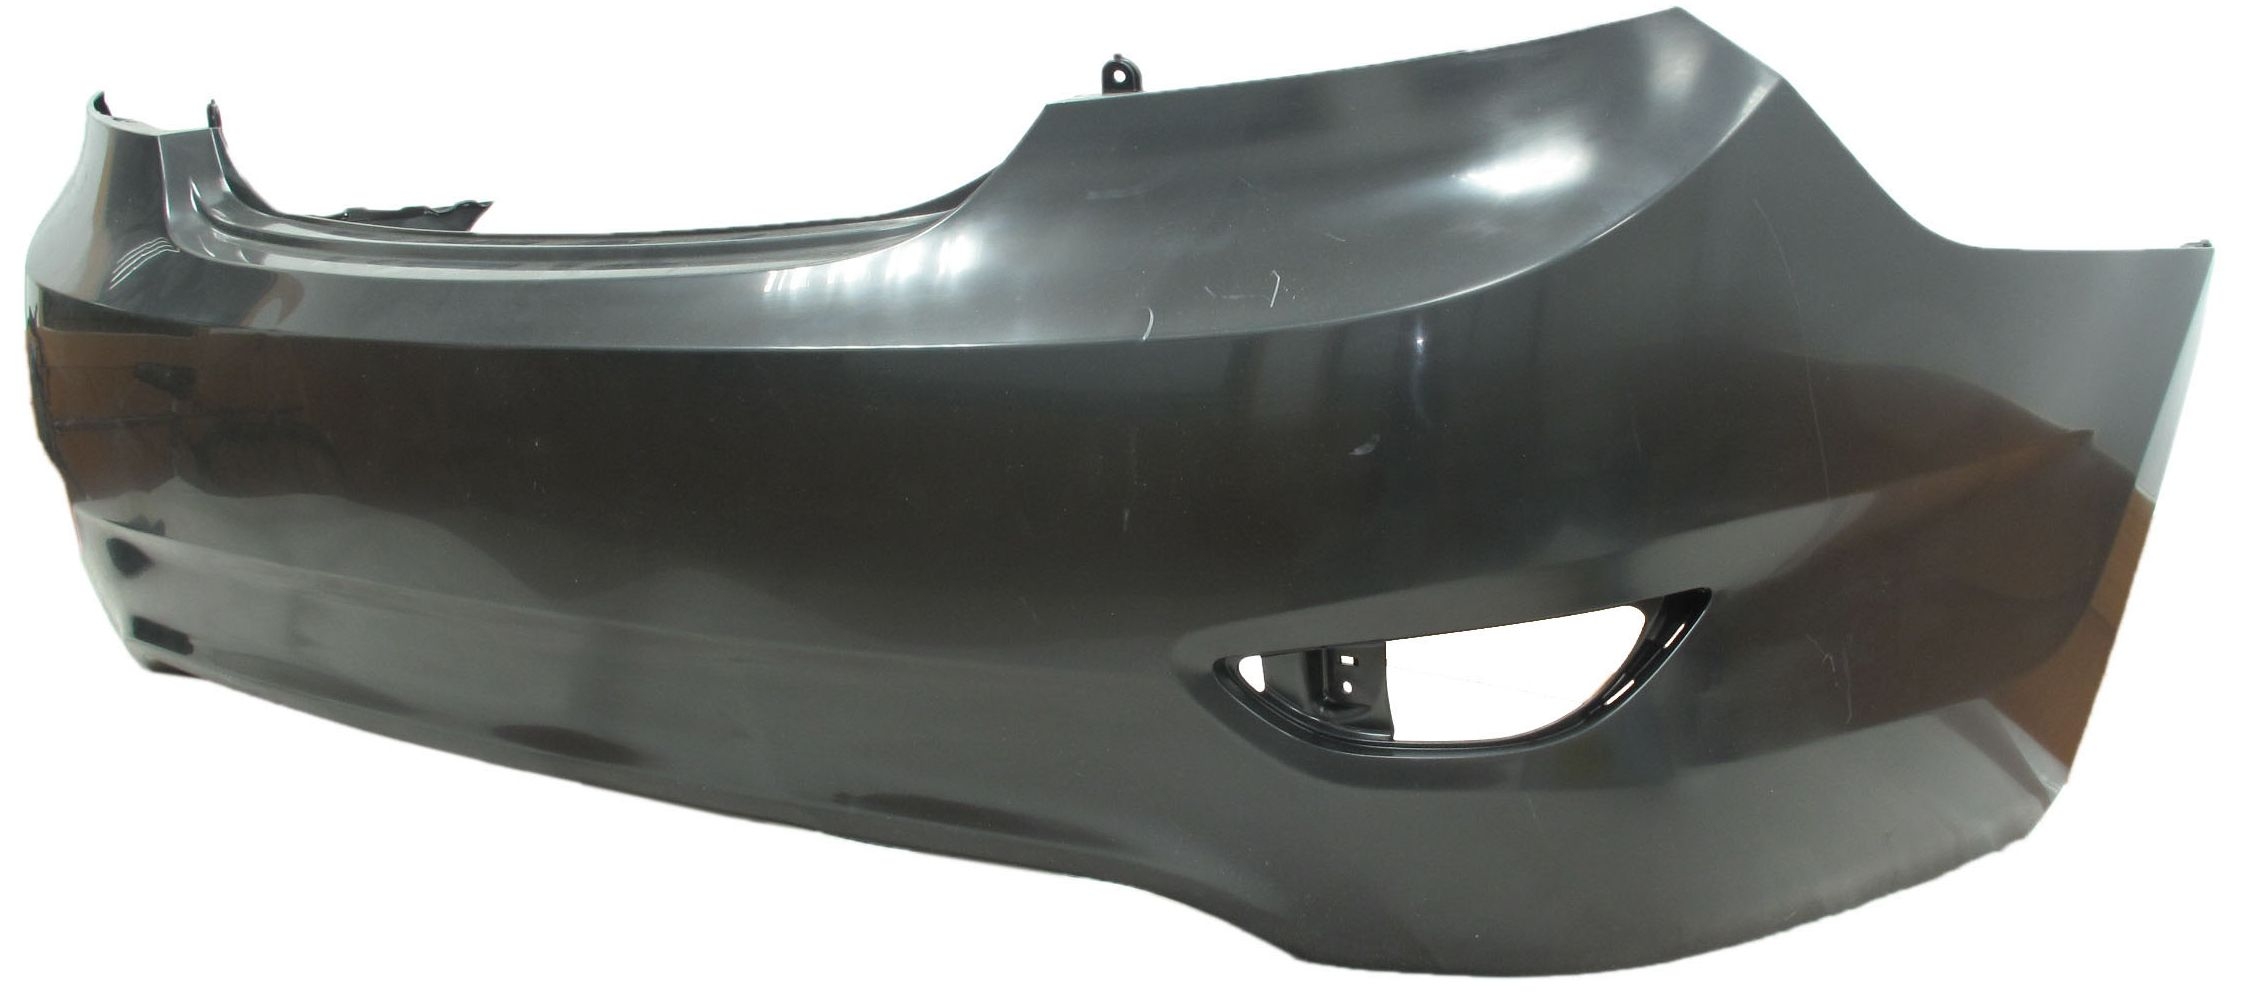 ACCENT 12-15 Rear Cover Sedan Without Sensor Hole Prime